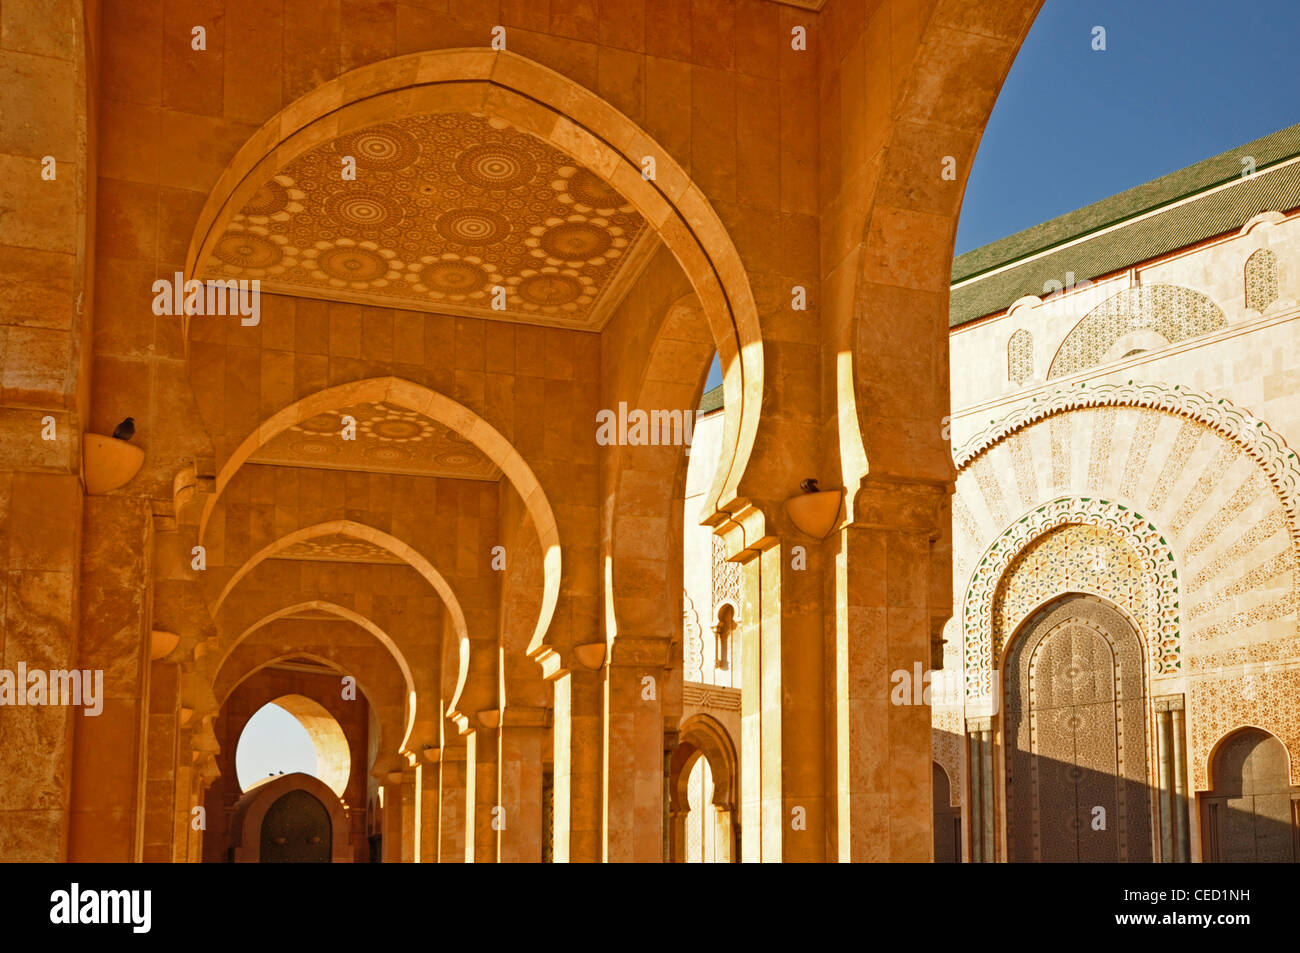 NORTH AFRICA, MOROCCO, Casablanca, Great Mosque Hassan II (1993), Islamic, decorated archways Stock Photo